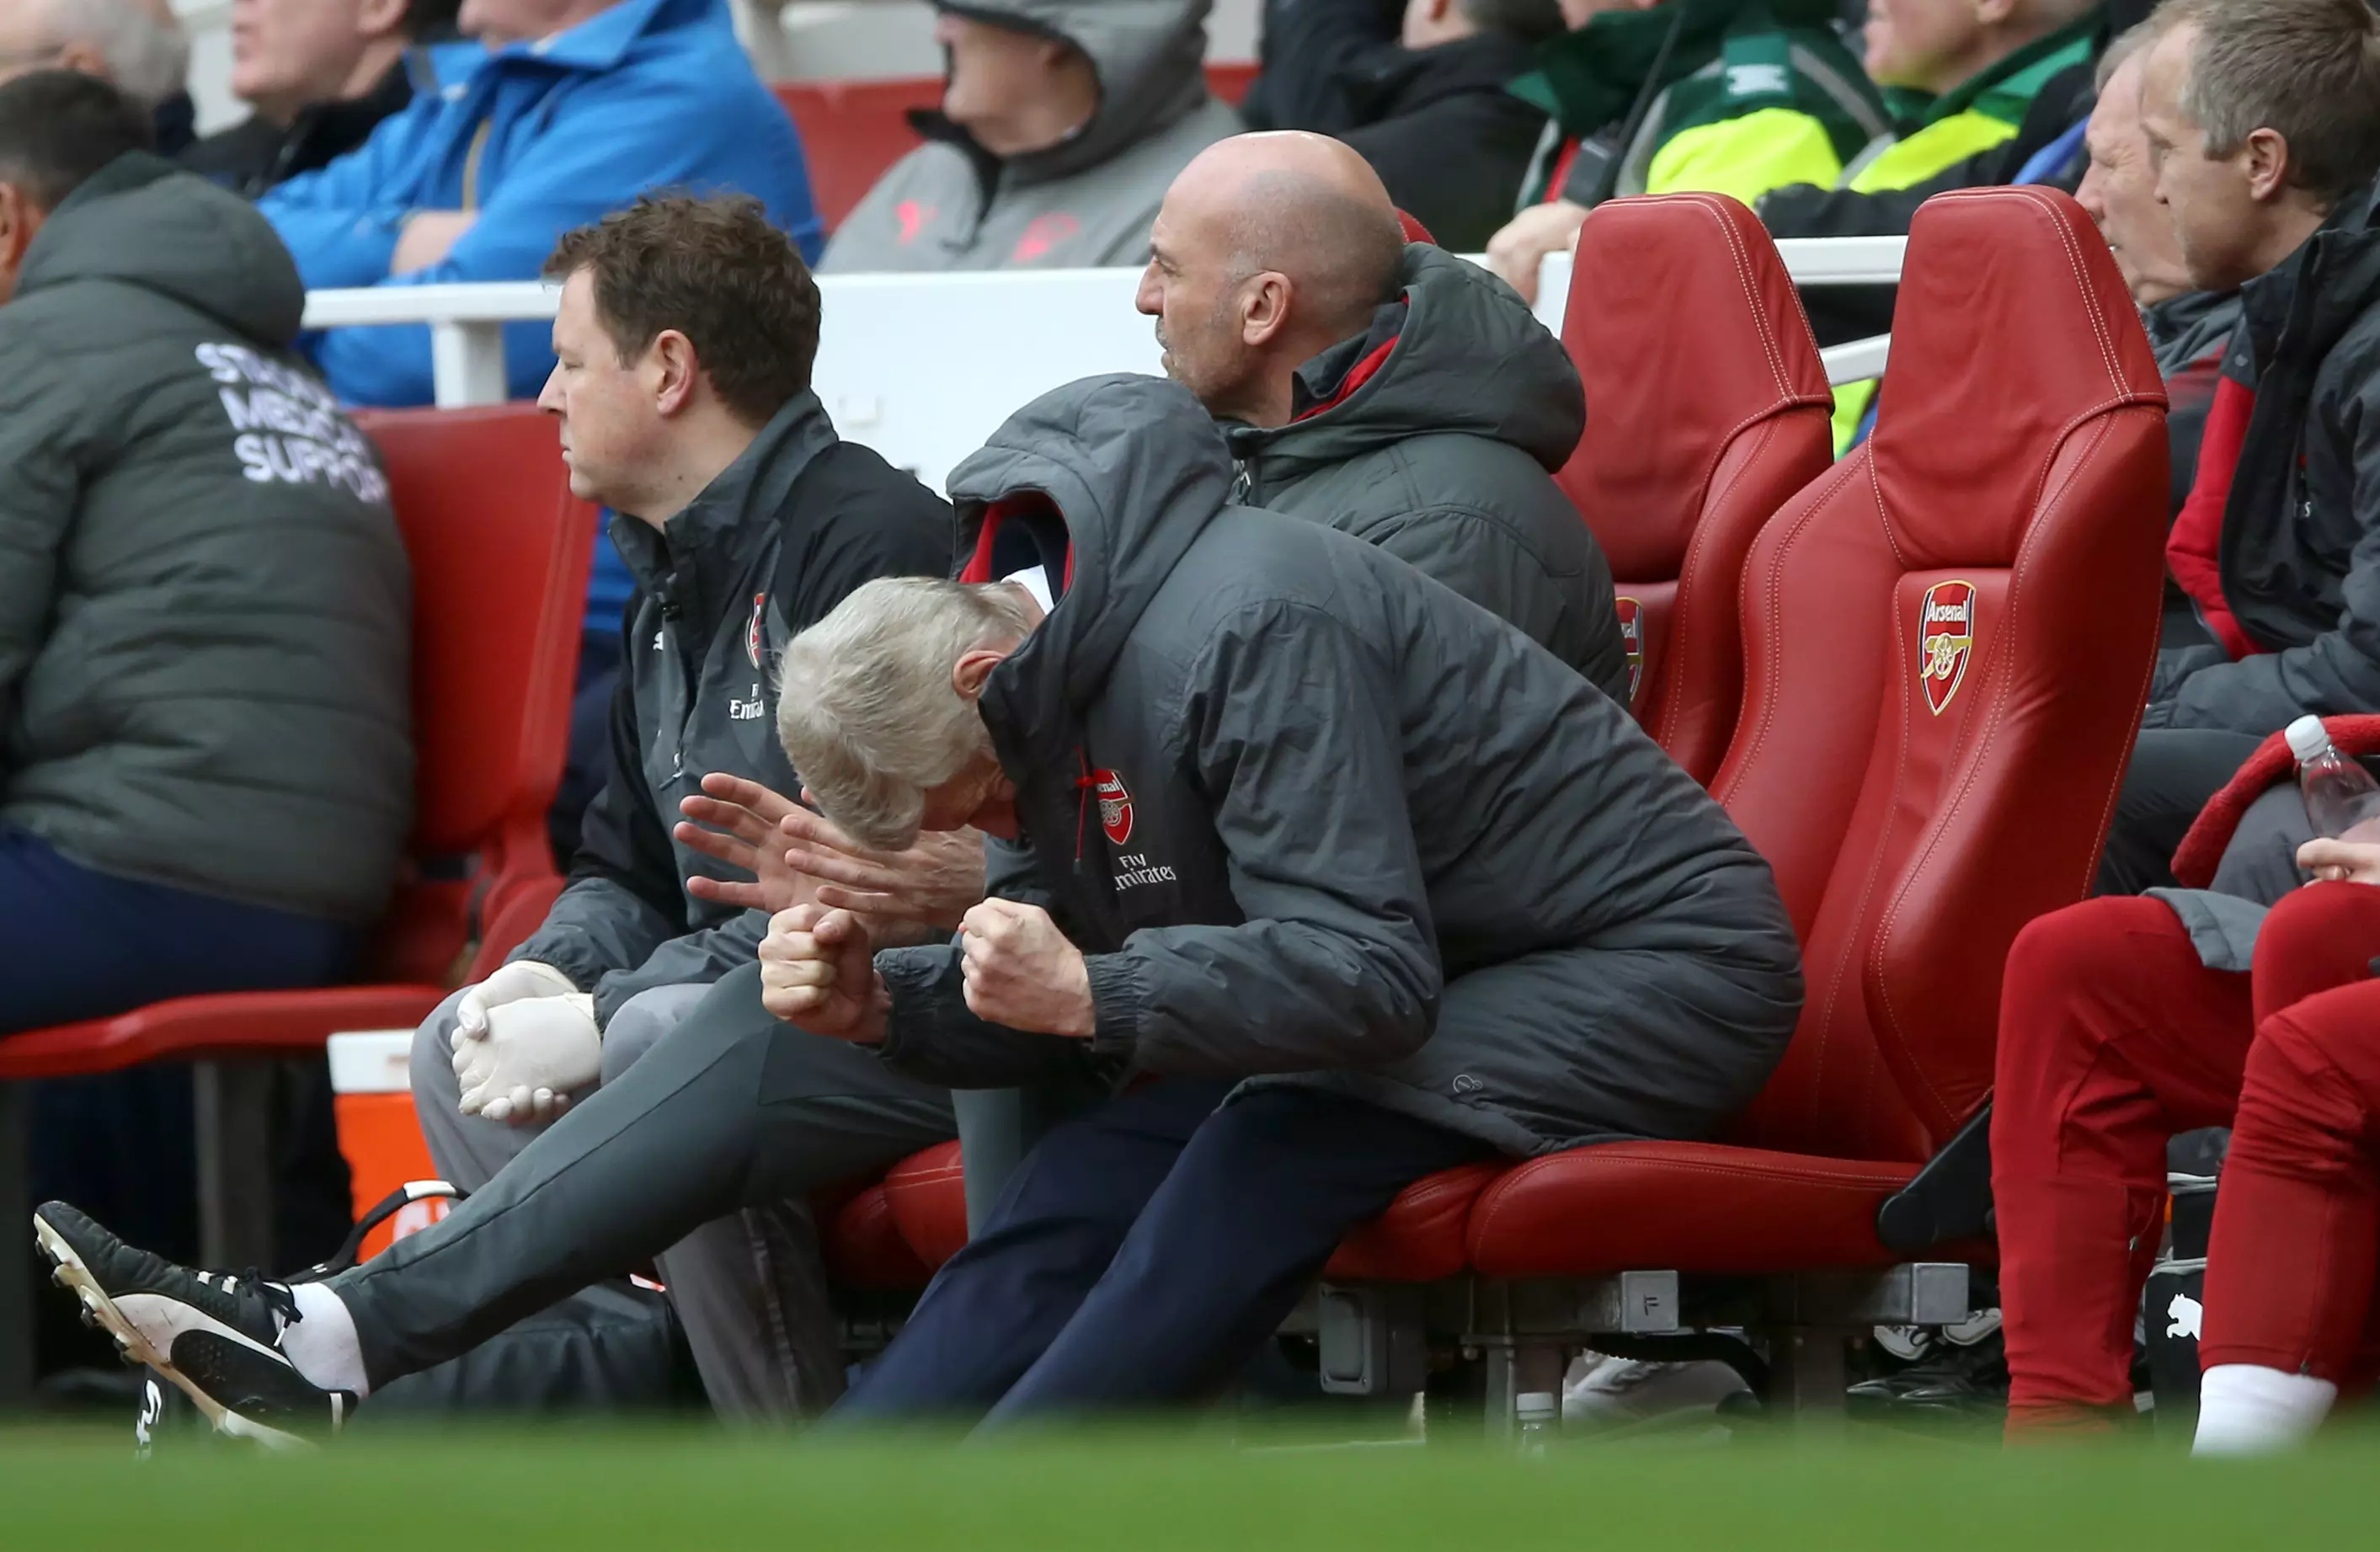 Wenger gestures on the touchline. Image: PA